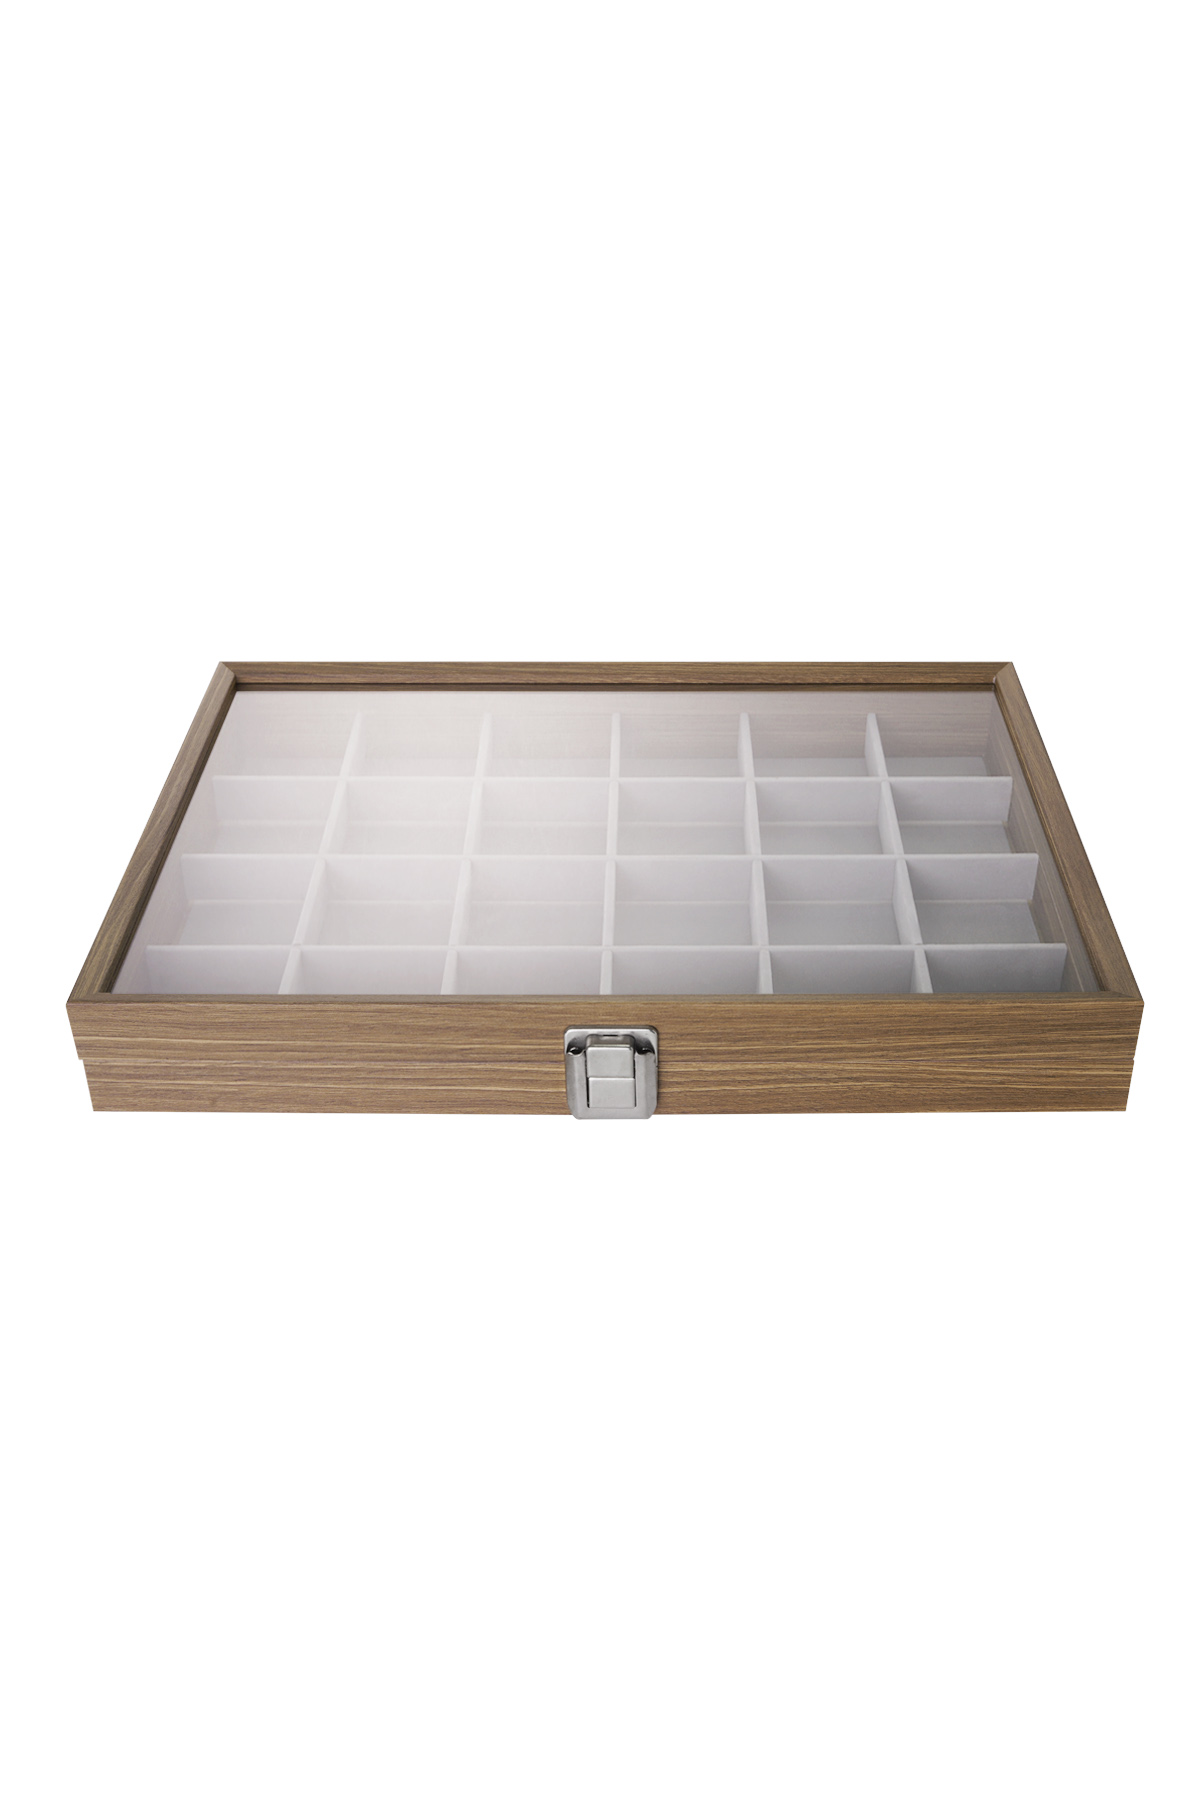 Display box compartments - gray Wood Picture2